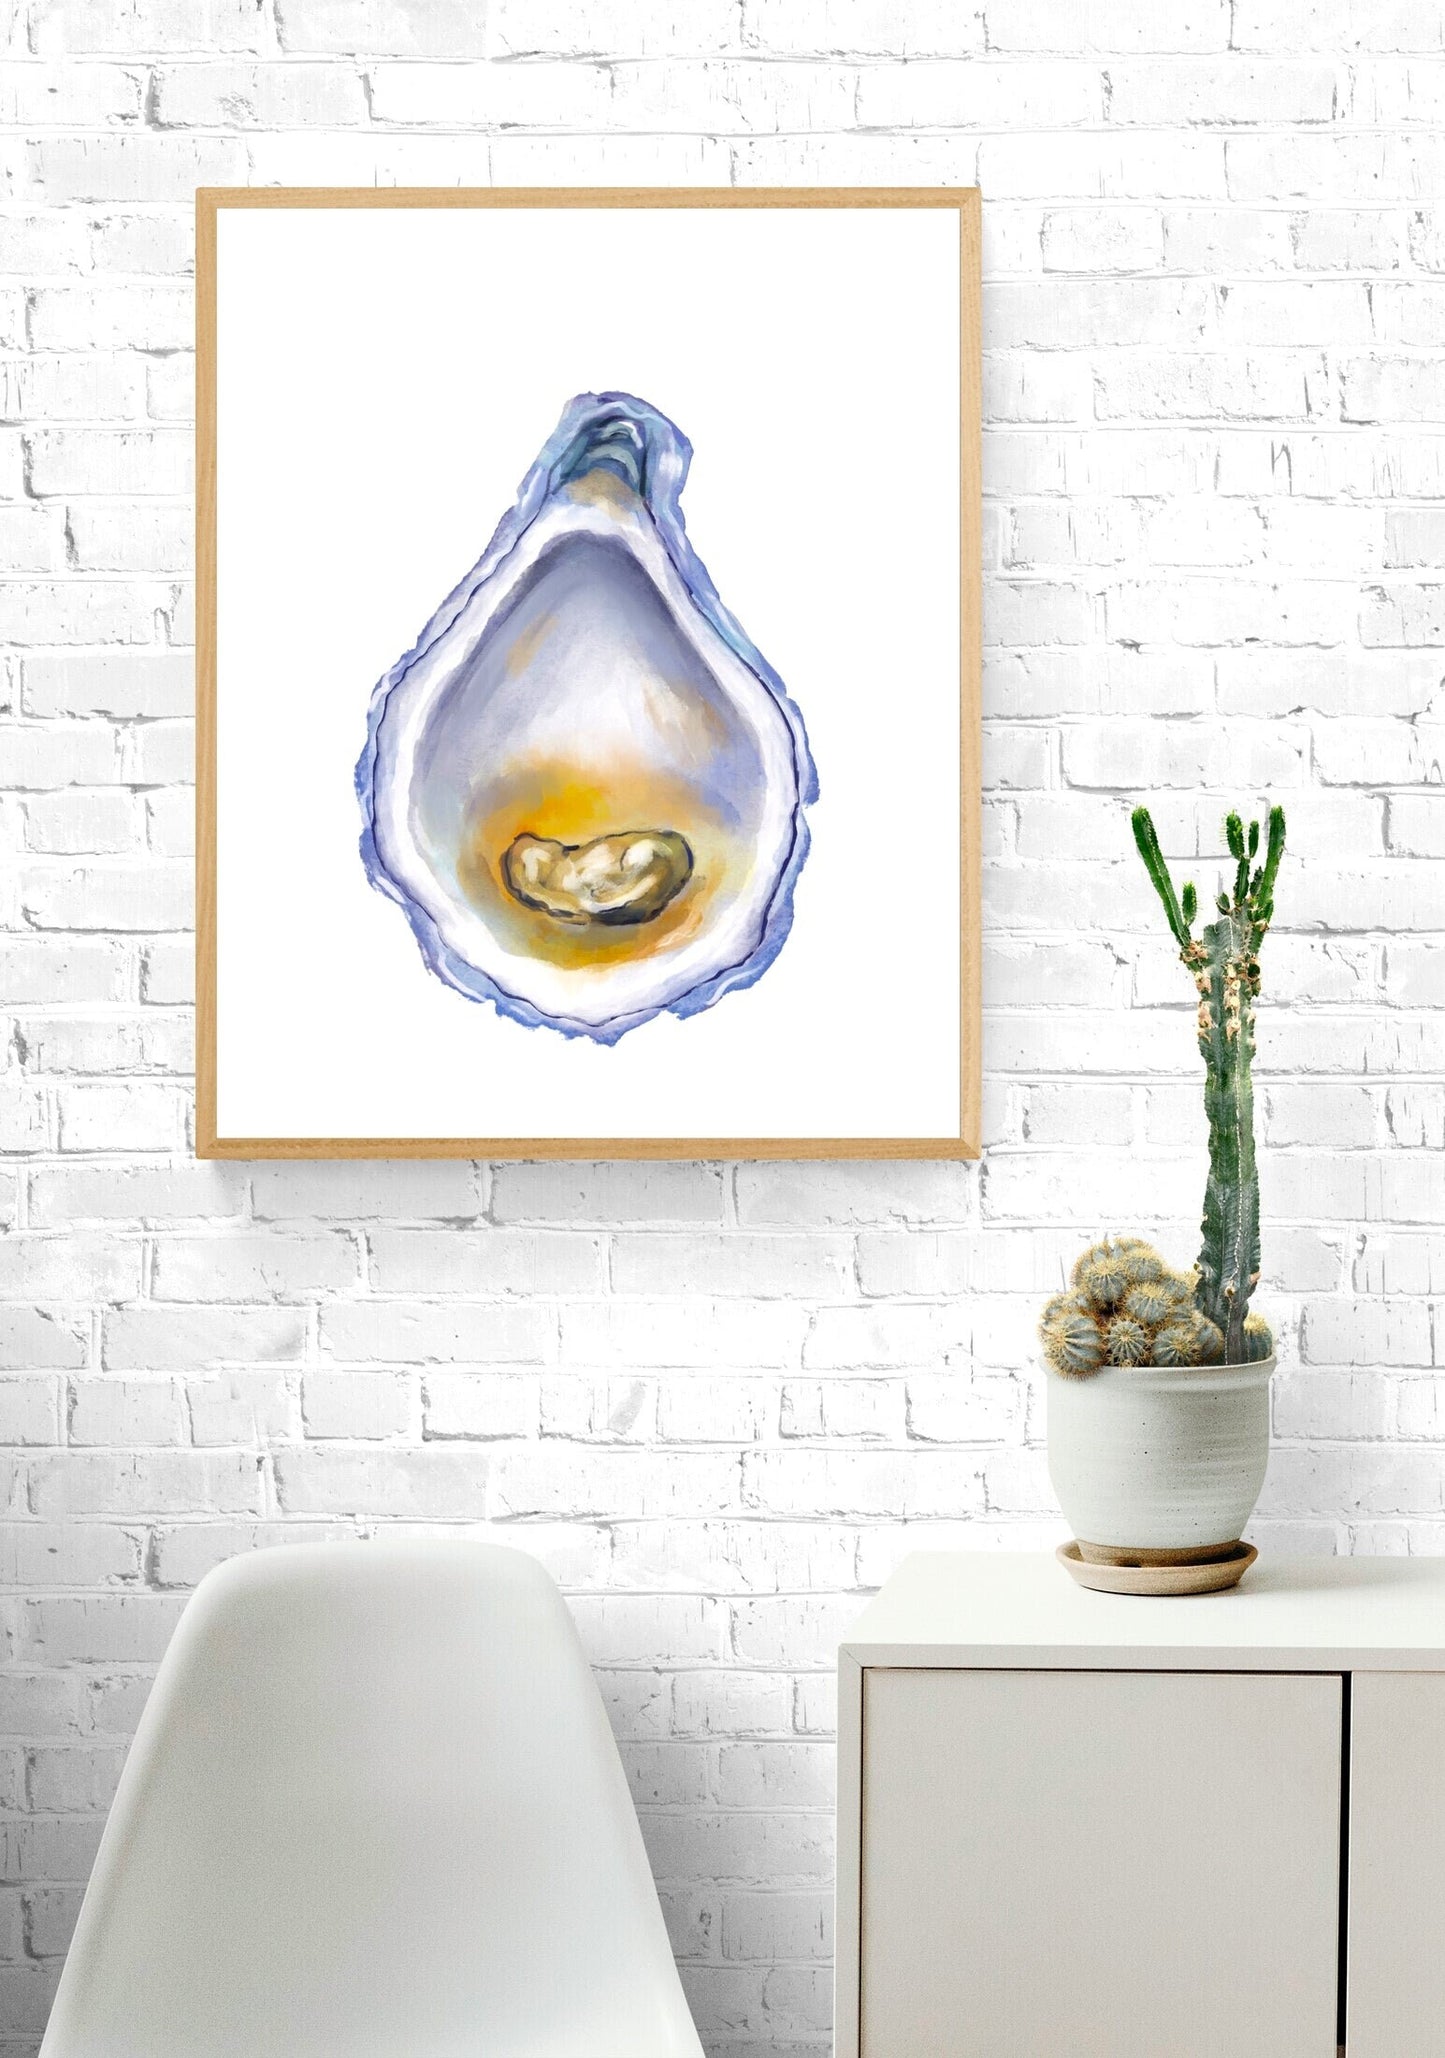 Oyster Print, Oyster Painting, Beach House Decor, Shell Print, Oyster Shell Wall Art, Coastal Decor, Living Room Wall Art no2